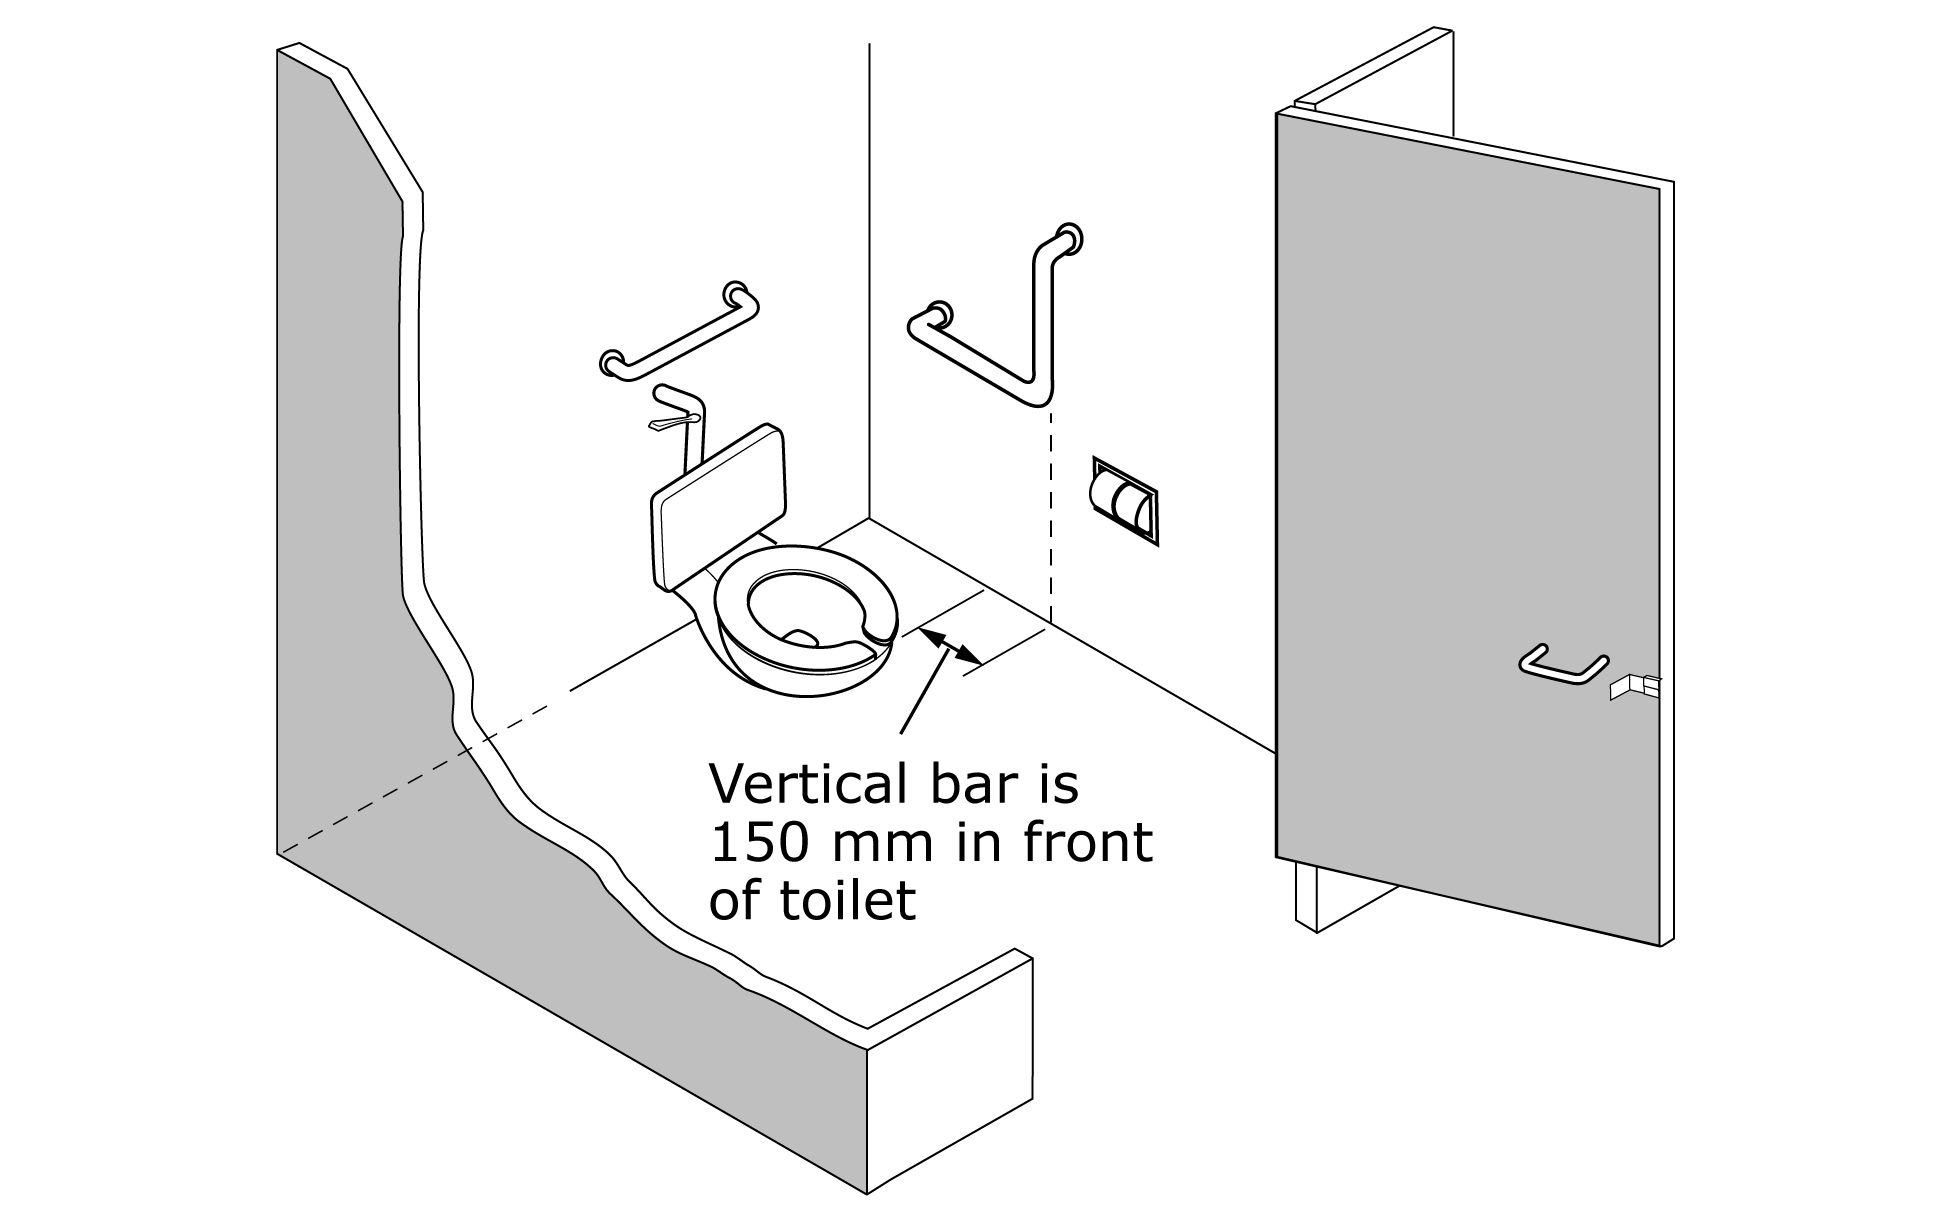 This figure shows a toilet stall as seen from a three-quarters view and slightly above, with the toilet and rear and side grab bars in full view. The distance between the front edge of the toilet and the side grab bar is 150 mm.